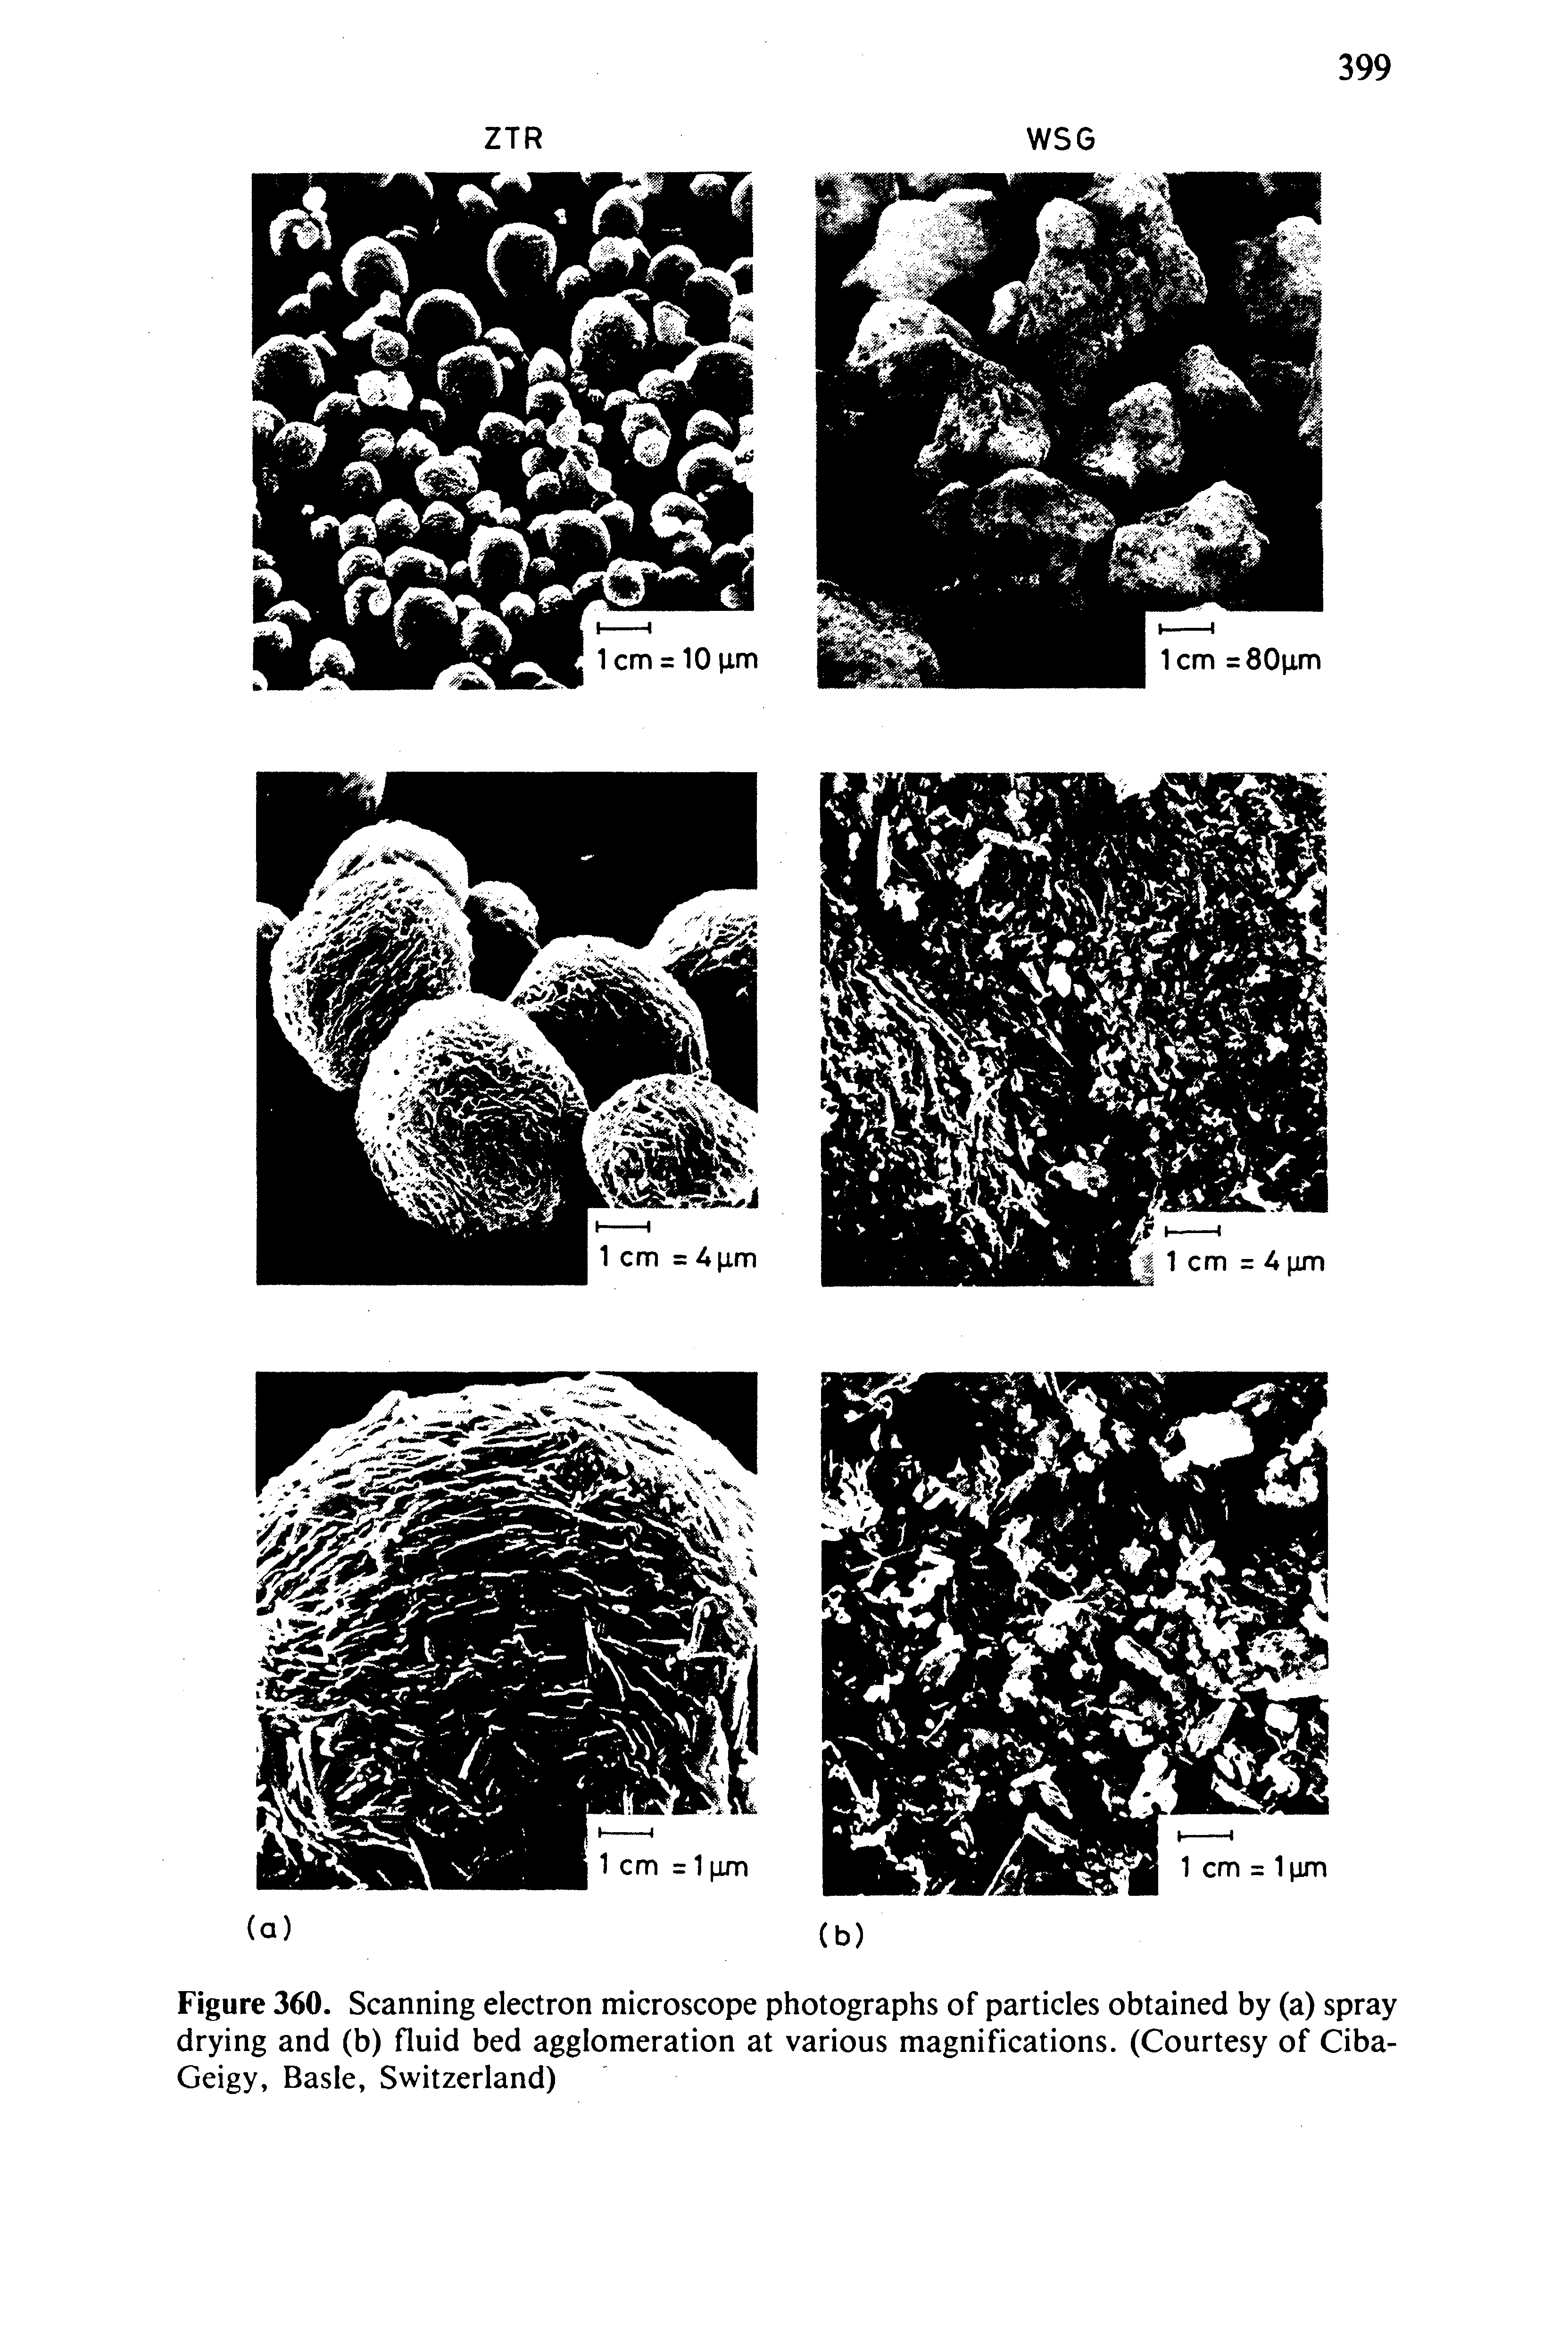 Figure 360. Scanning electron microscope photographs of particles obtained by (a) spray drying and (b) fluid bed agglomeration at various magnifications. (Courtesy of Ciba-Geigy, Basle, Switzerland)...